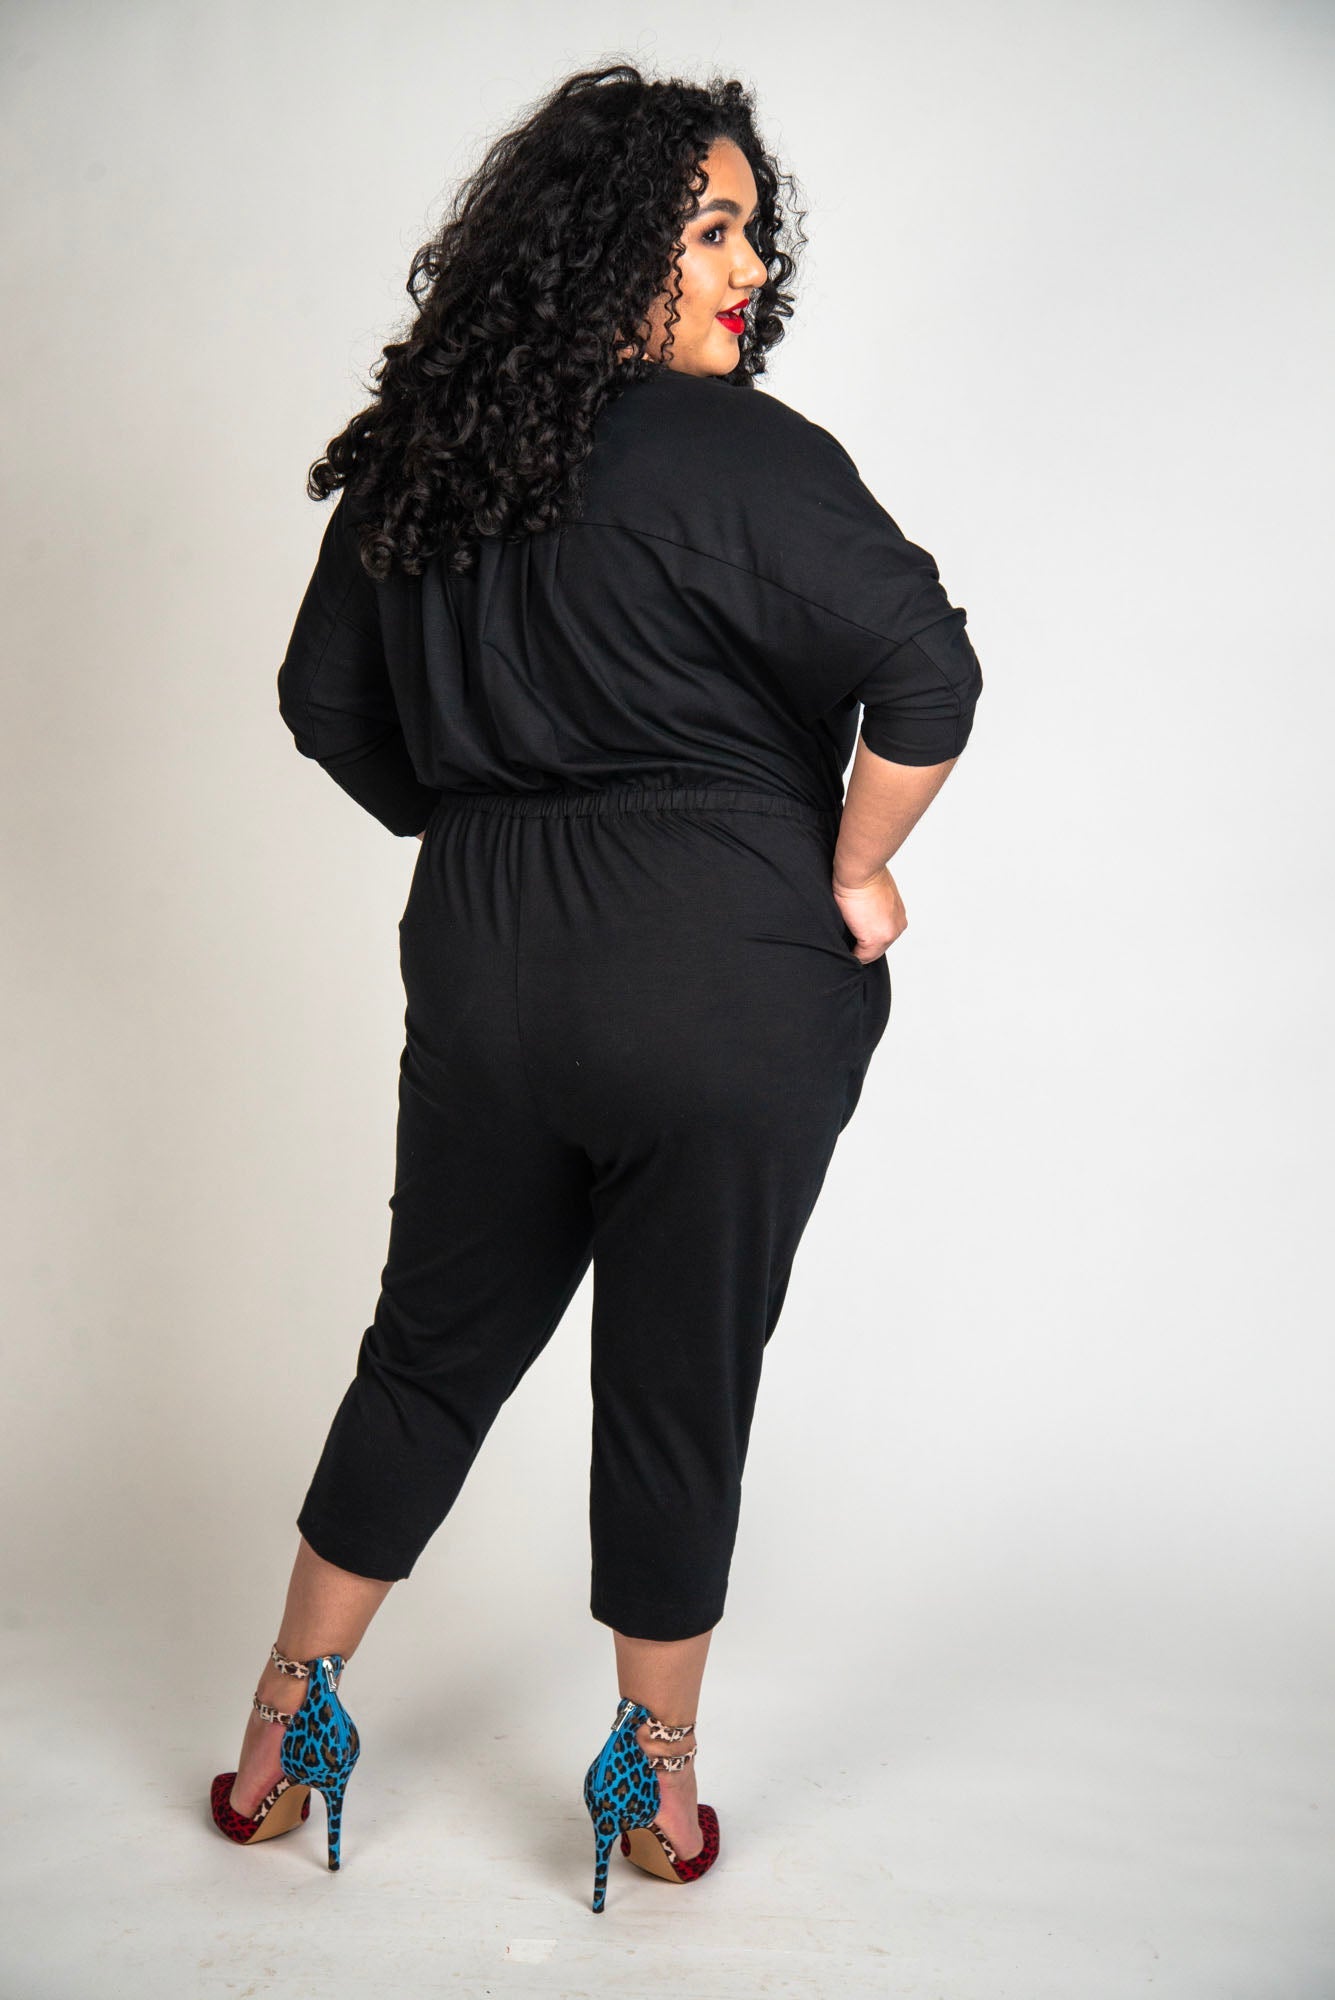 Mayes NYC Alex Back to Front Reversible Jumpsuit Solid color black worn by model Grace Delgado